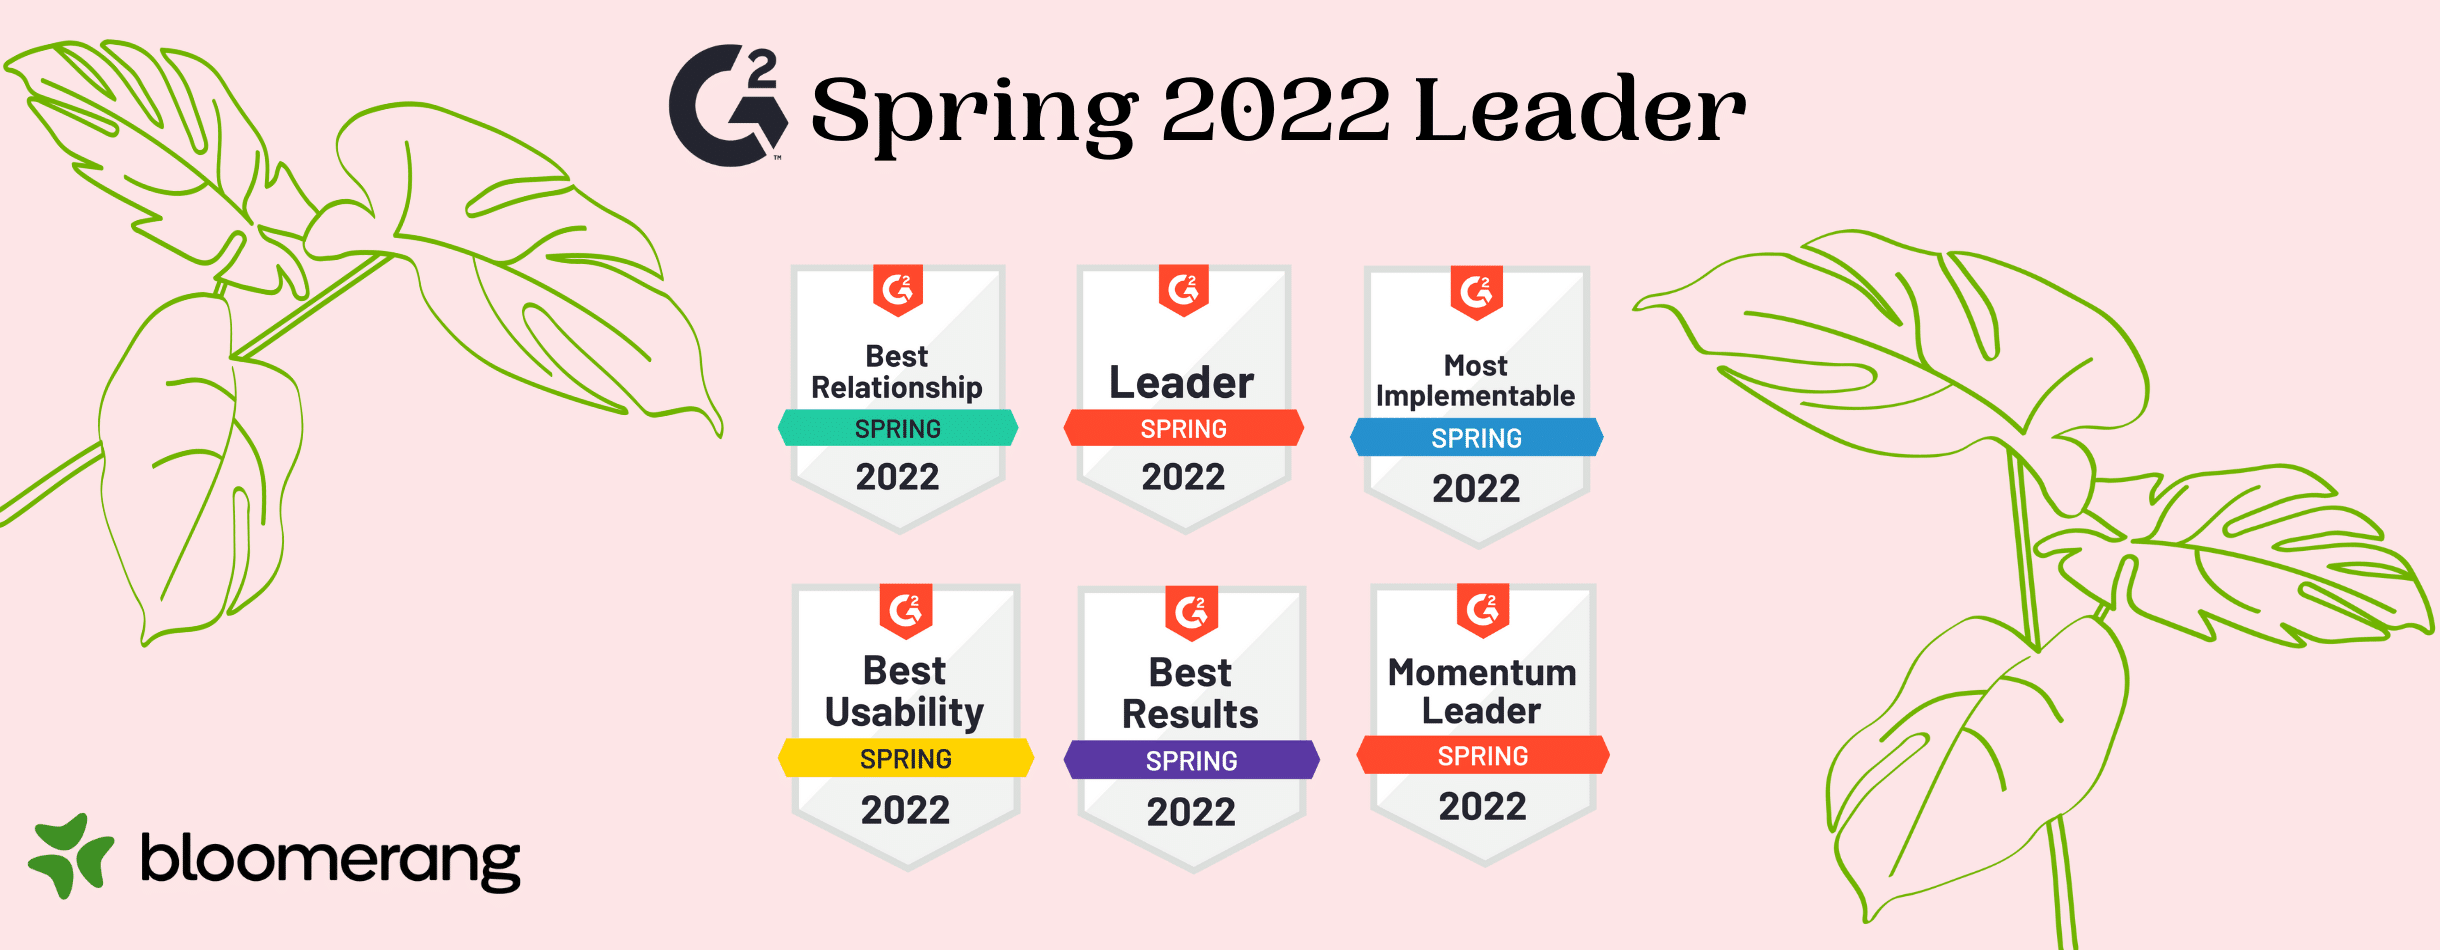 Bloomerang named a leader in G2 spring 2022 reports